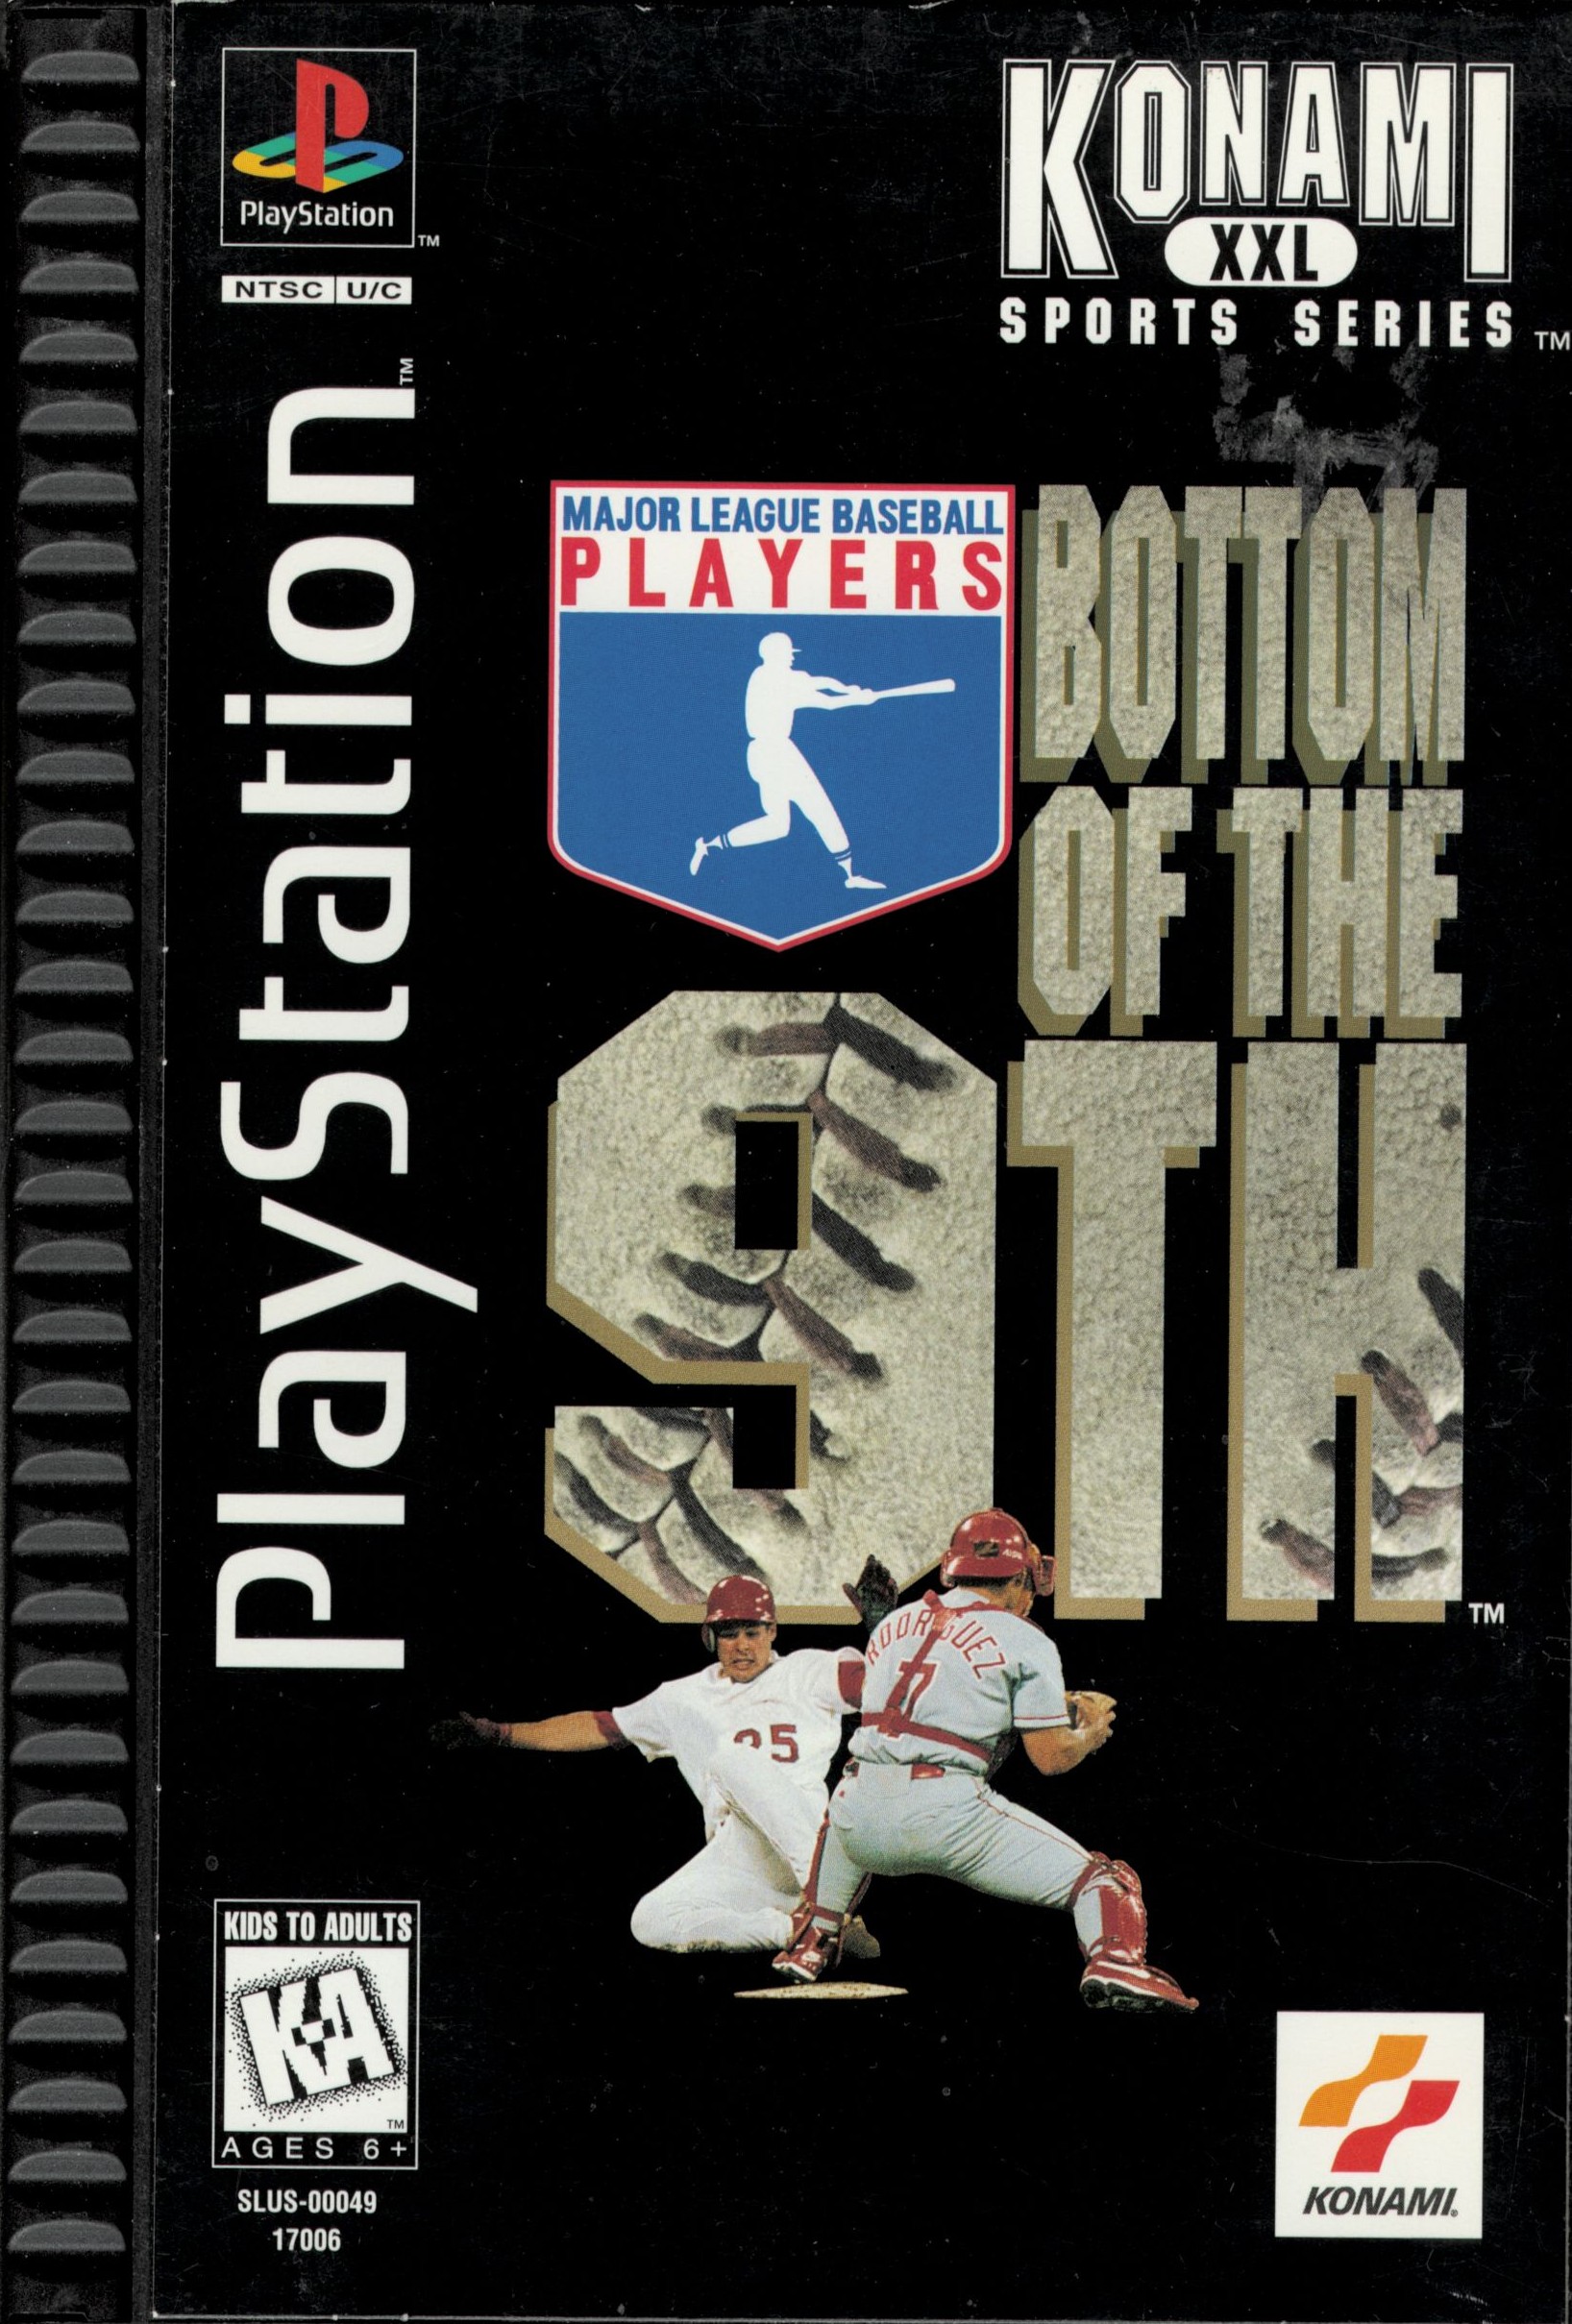 Bottom of the 9th PSX cover